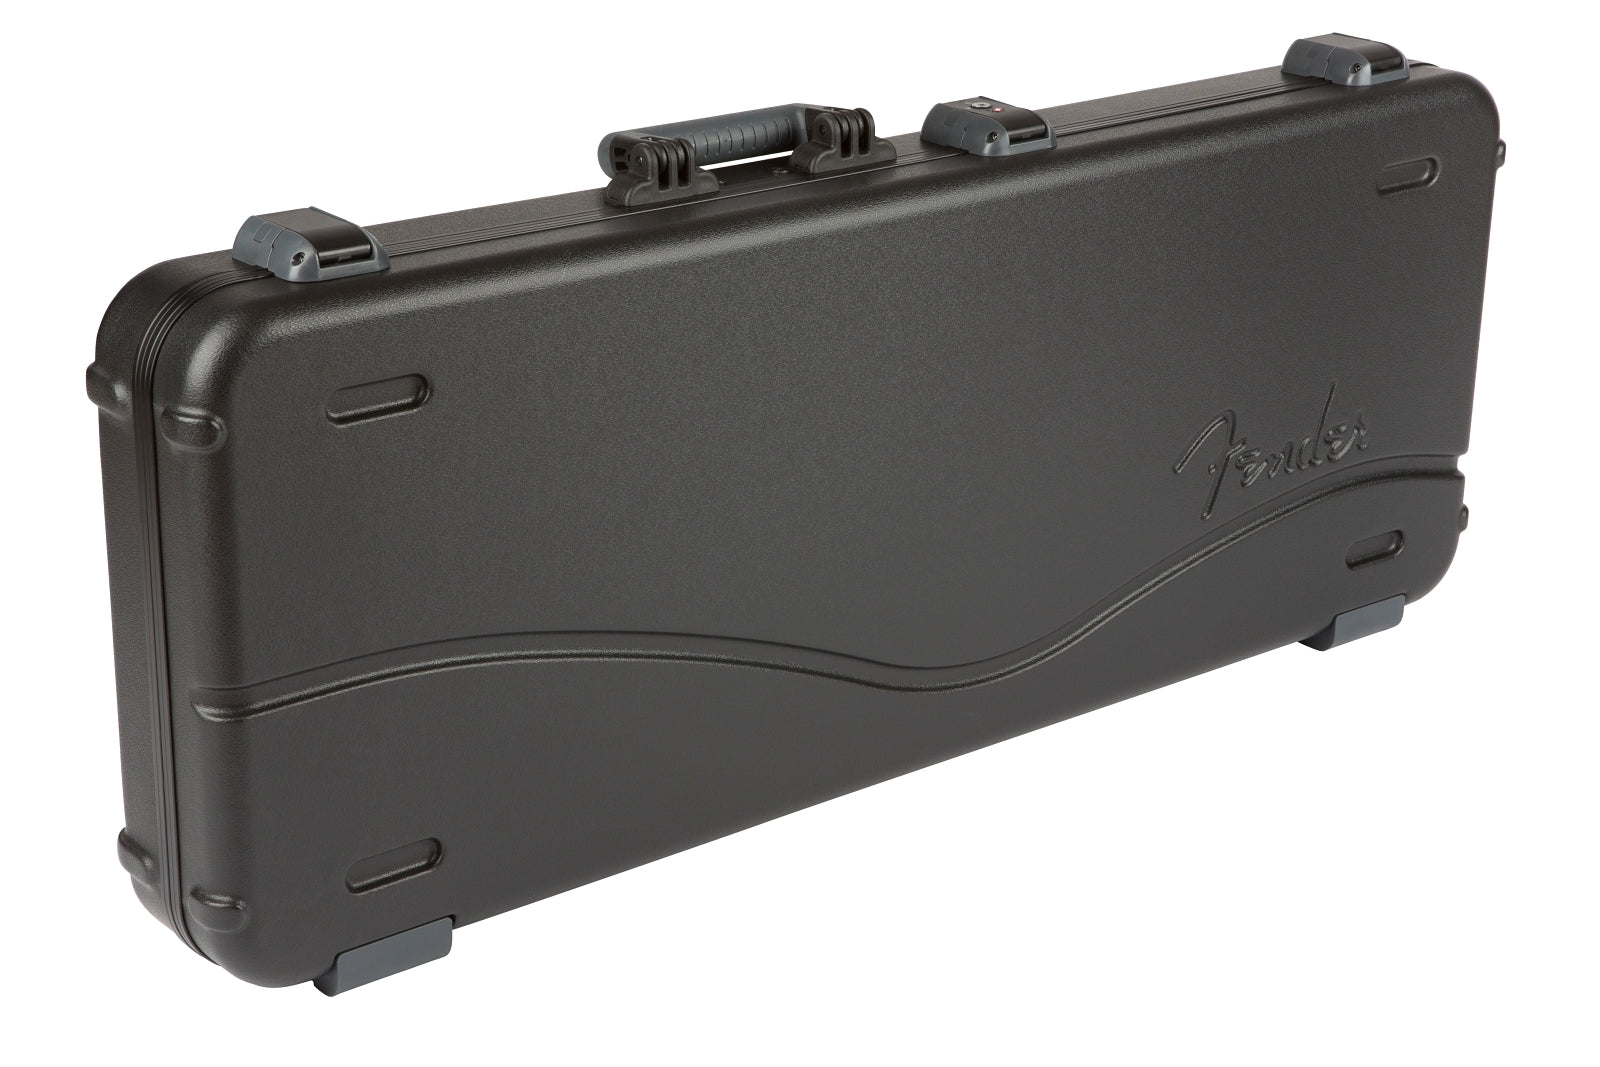 Fender Deluxe Molded Case For Strats and Tele